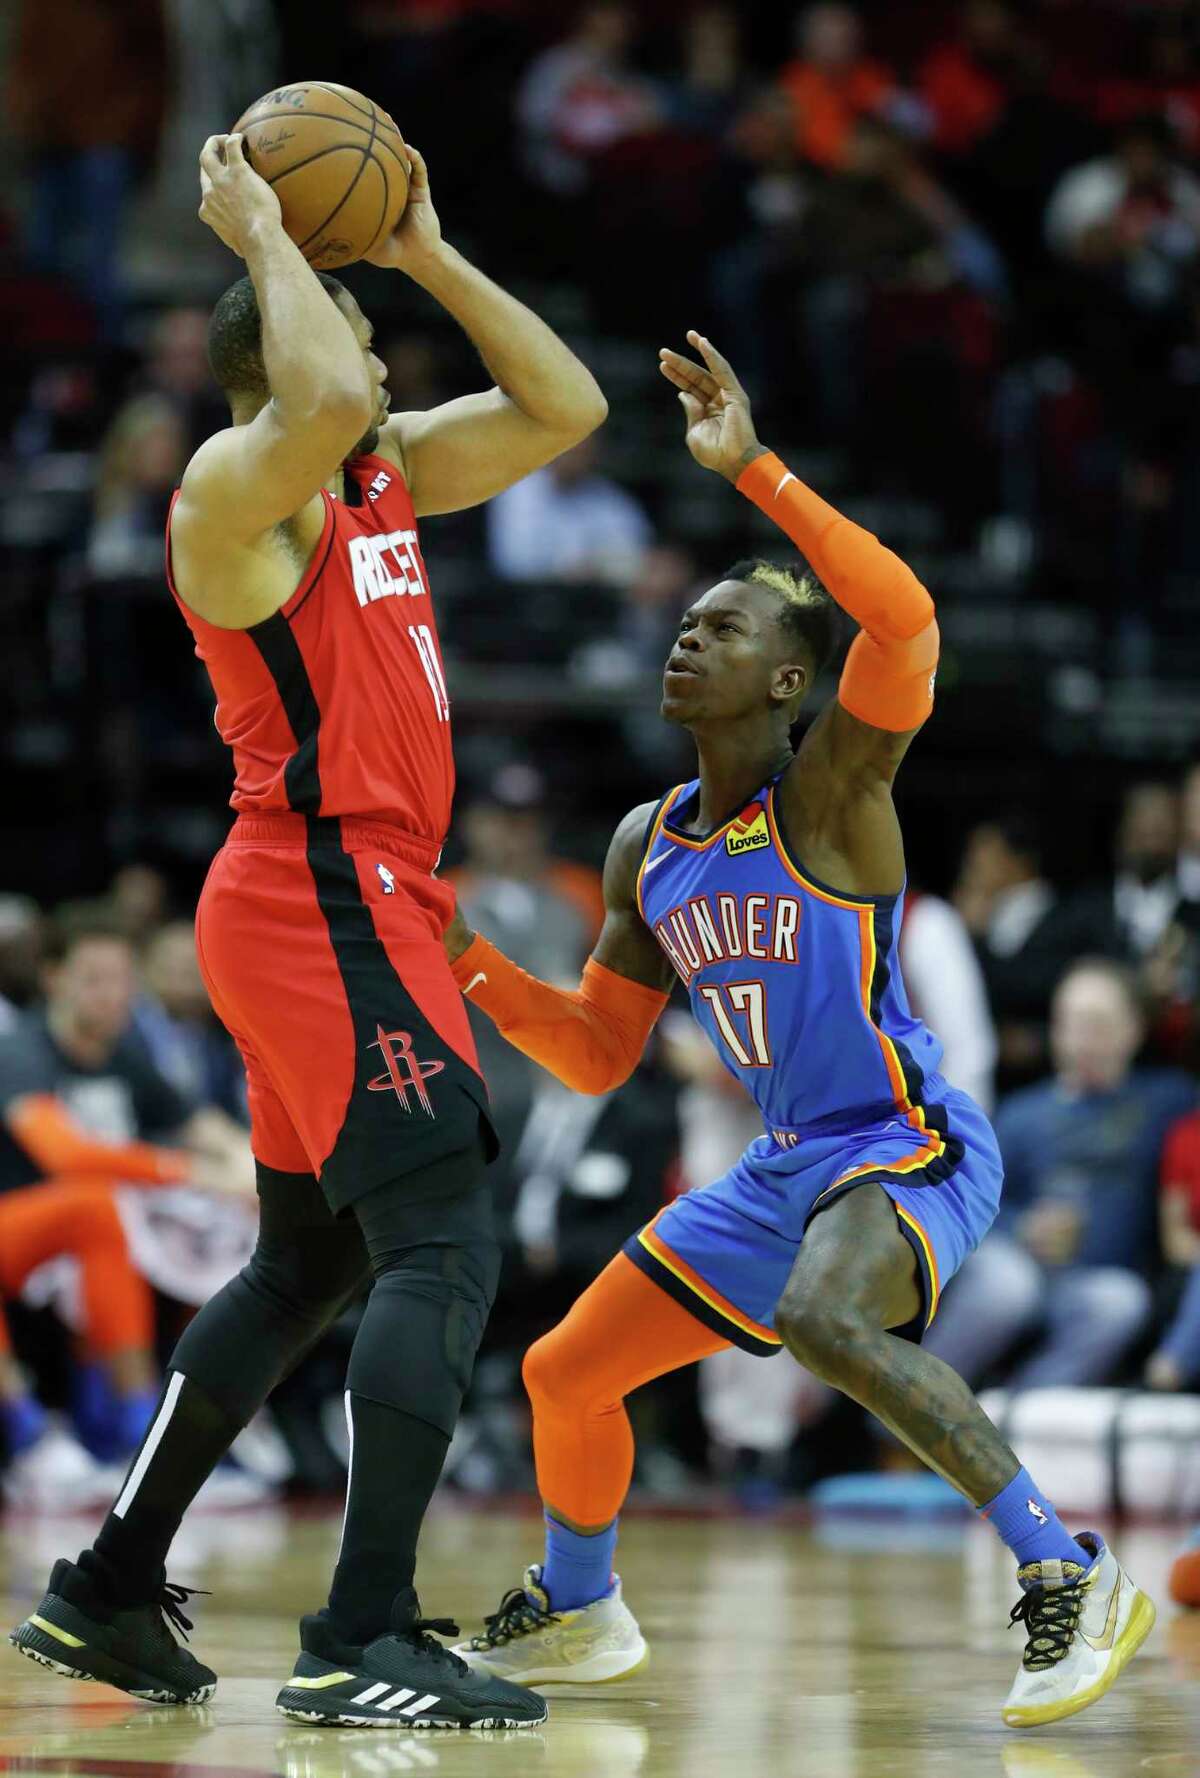 Houston Rockets guard Eric Gordon (10) looks to pass over Oklahoma City Thunder guard Dennis Schroder (17) during the second half of an NBA basketball game at Toyota Center, in Houston, Monday, Jan. 20, 2020.